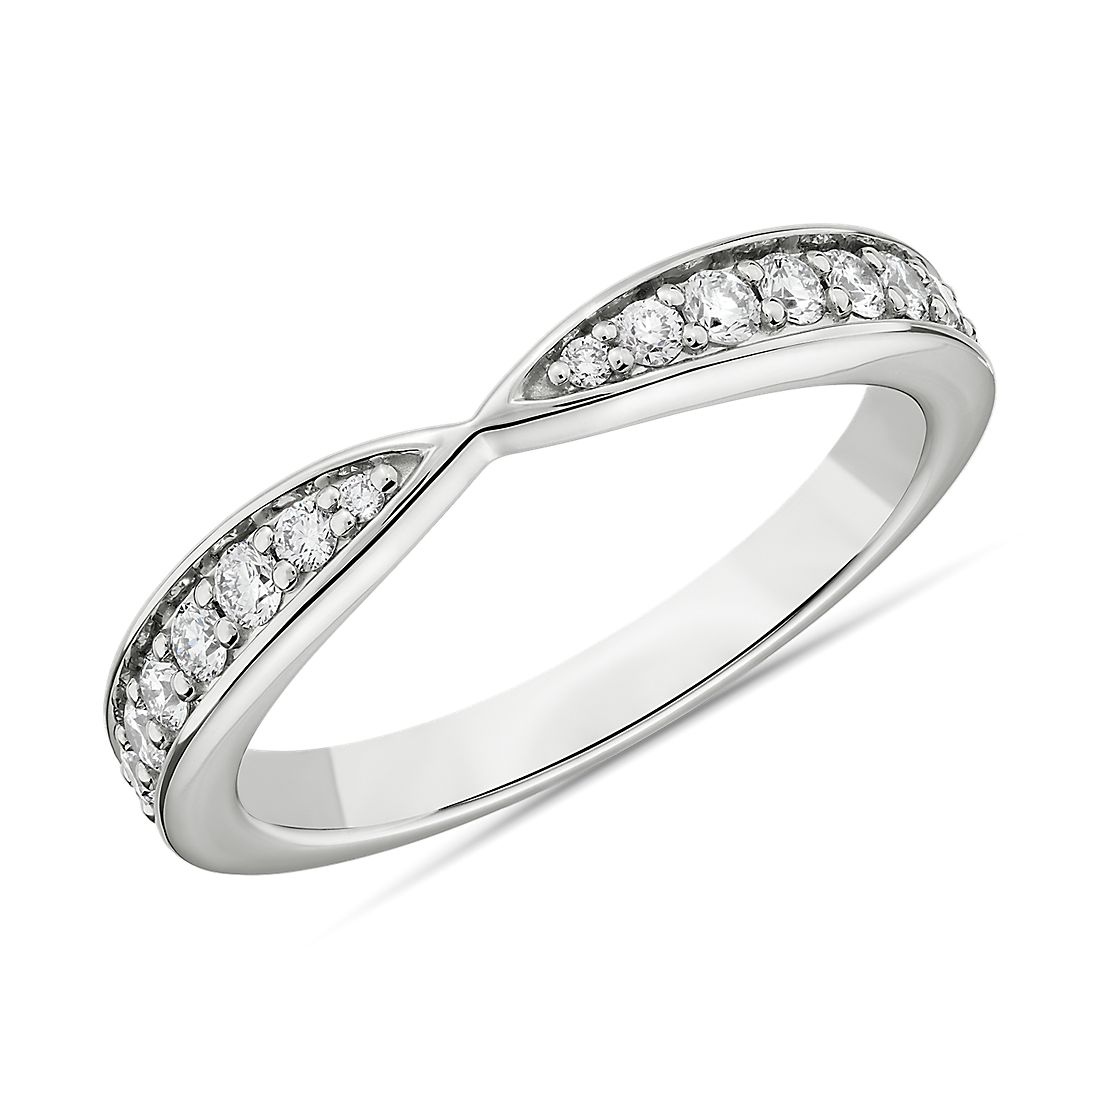 Contemporary Tapered Wedding Ring in 14k White Gold (1/3 ct. tw.)